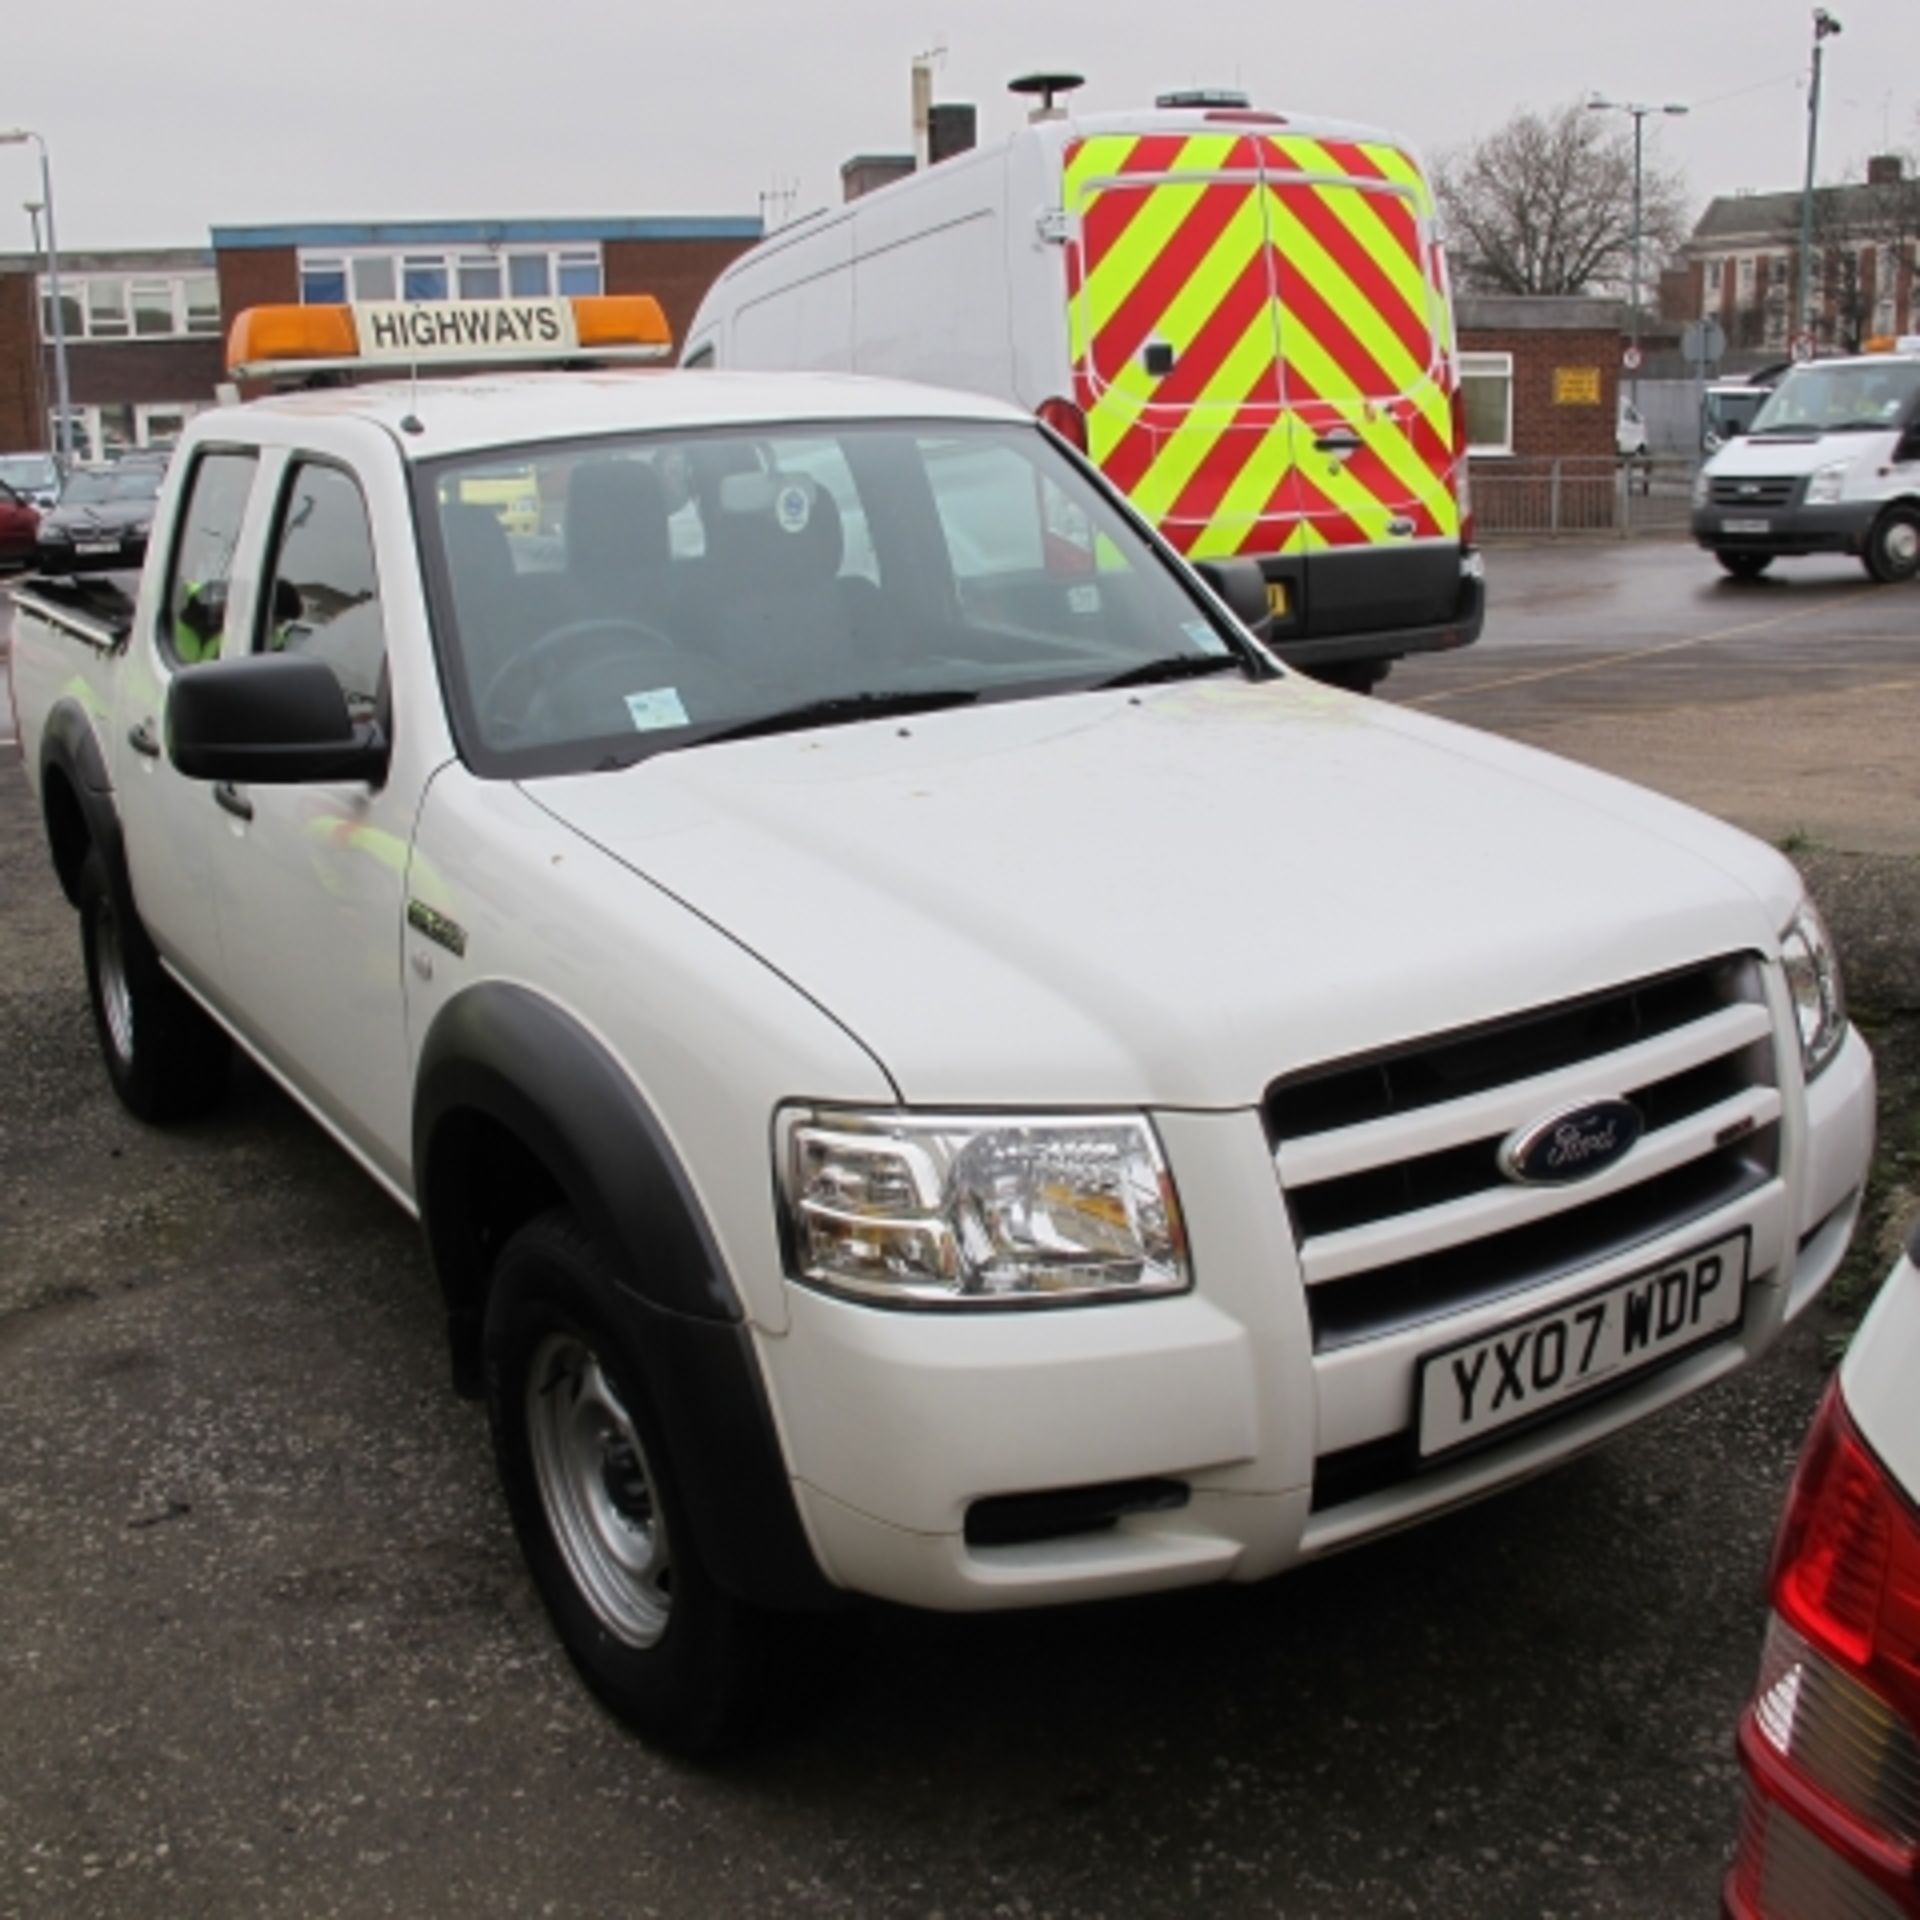 * Ford Ranger 2.5TDCI 4WD Crew Cab Pick up with Rear Sheet Cover & Ball/Pin Hitch, Reg YX07 WDP